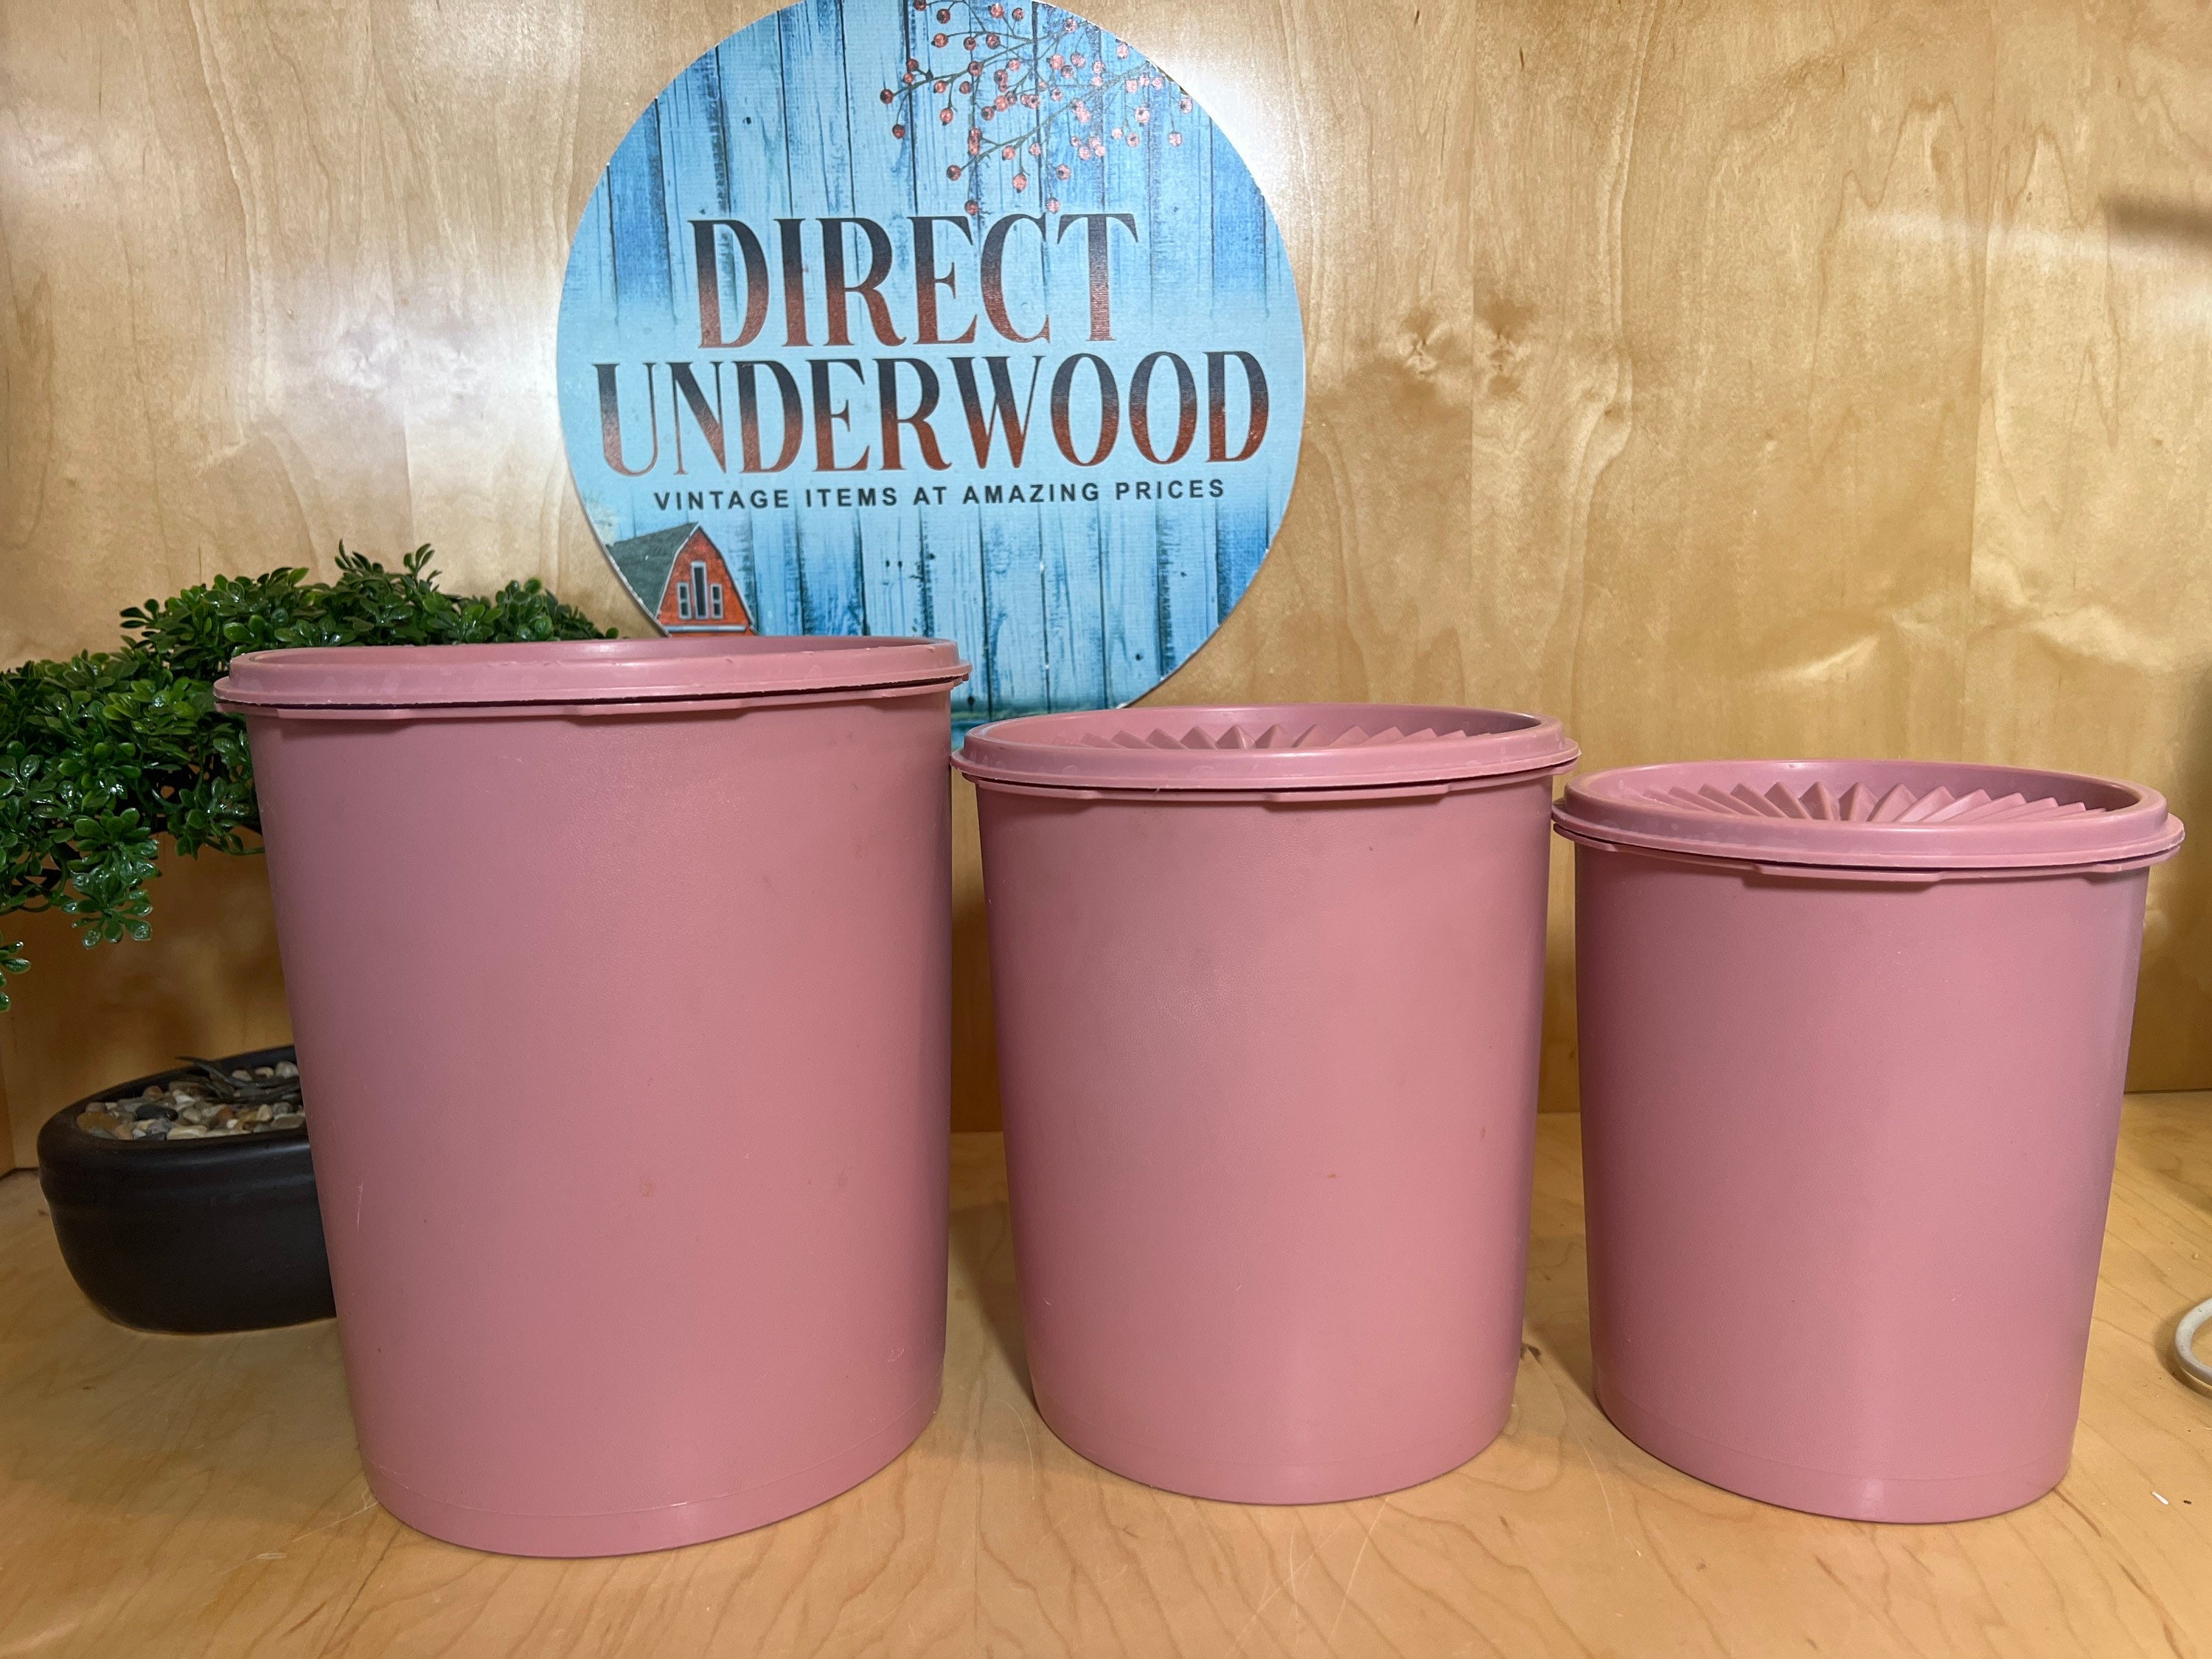 Vintage Tupperware Canisters / Muave Tupperware Container / RV Kitchen /  Rose Pink Muave / Tupperware Replacement Canisters / Retro Kitchen